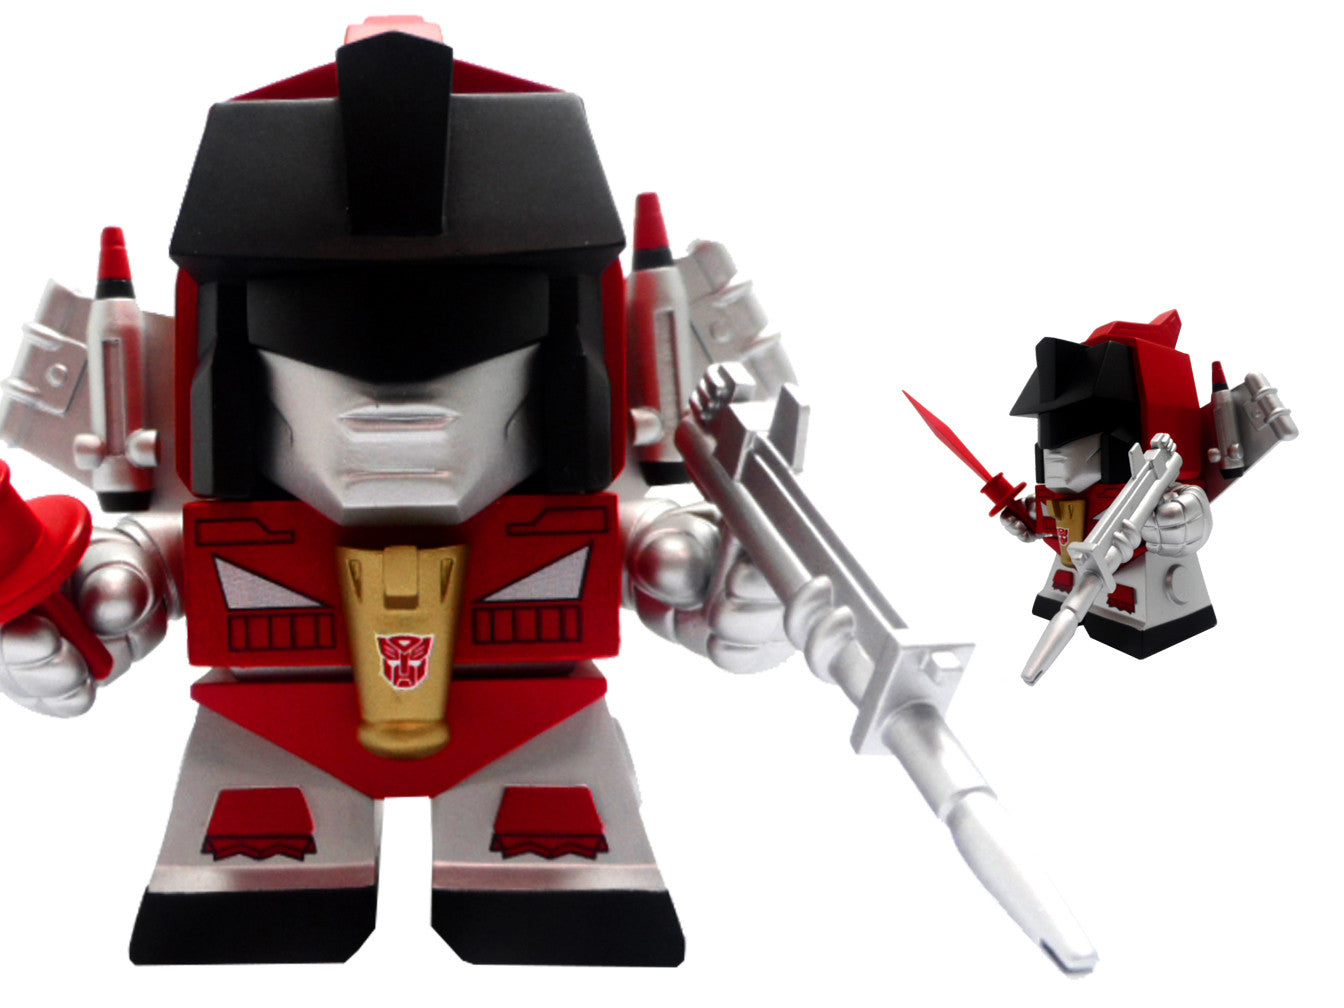 Transformers Series Three Mini Figures by The Loyal Subjects - Mindzai  - 12